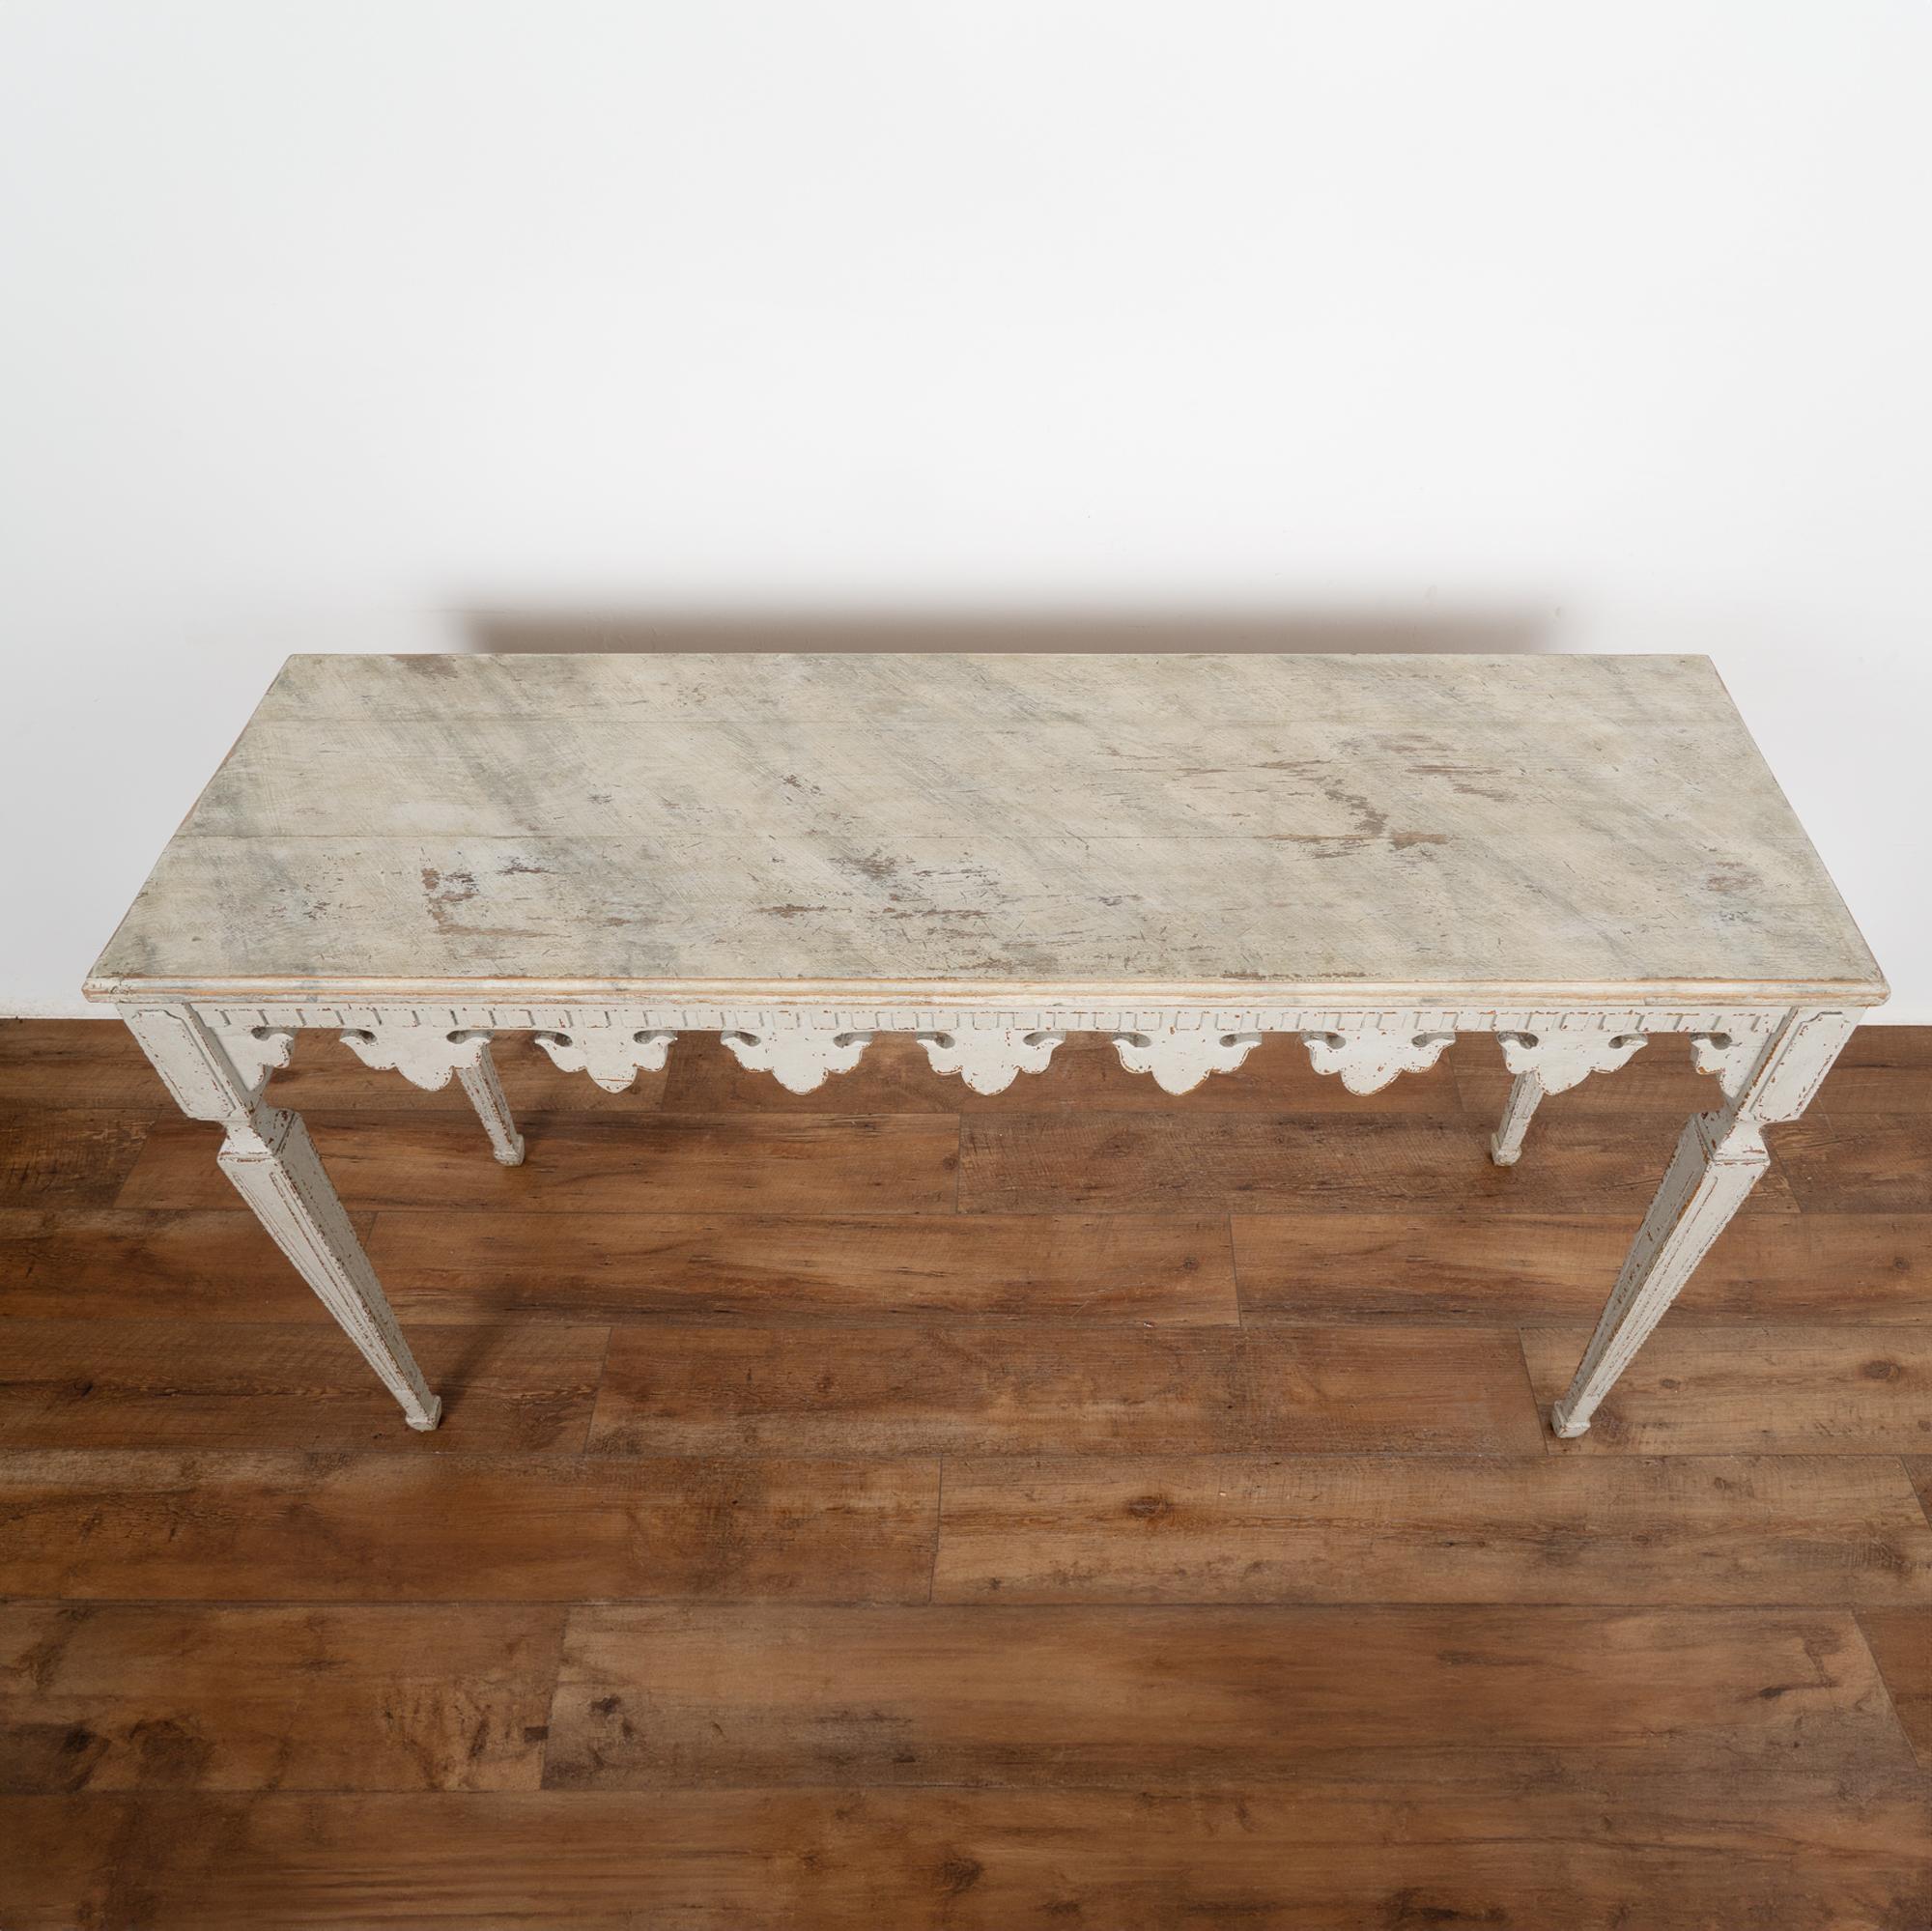 Swedish Gray Painted Console Table With Carved Fleur De Lis Skirt, Sweden circa 1880